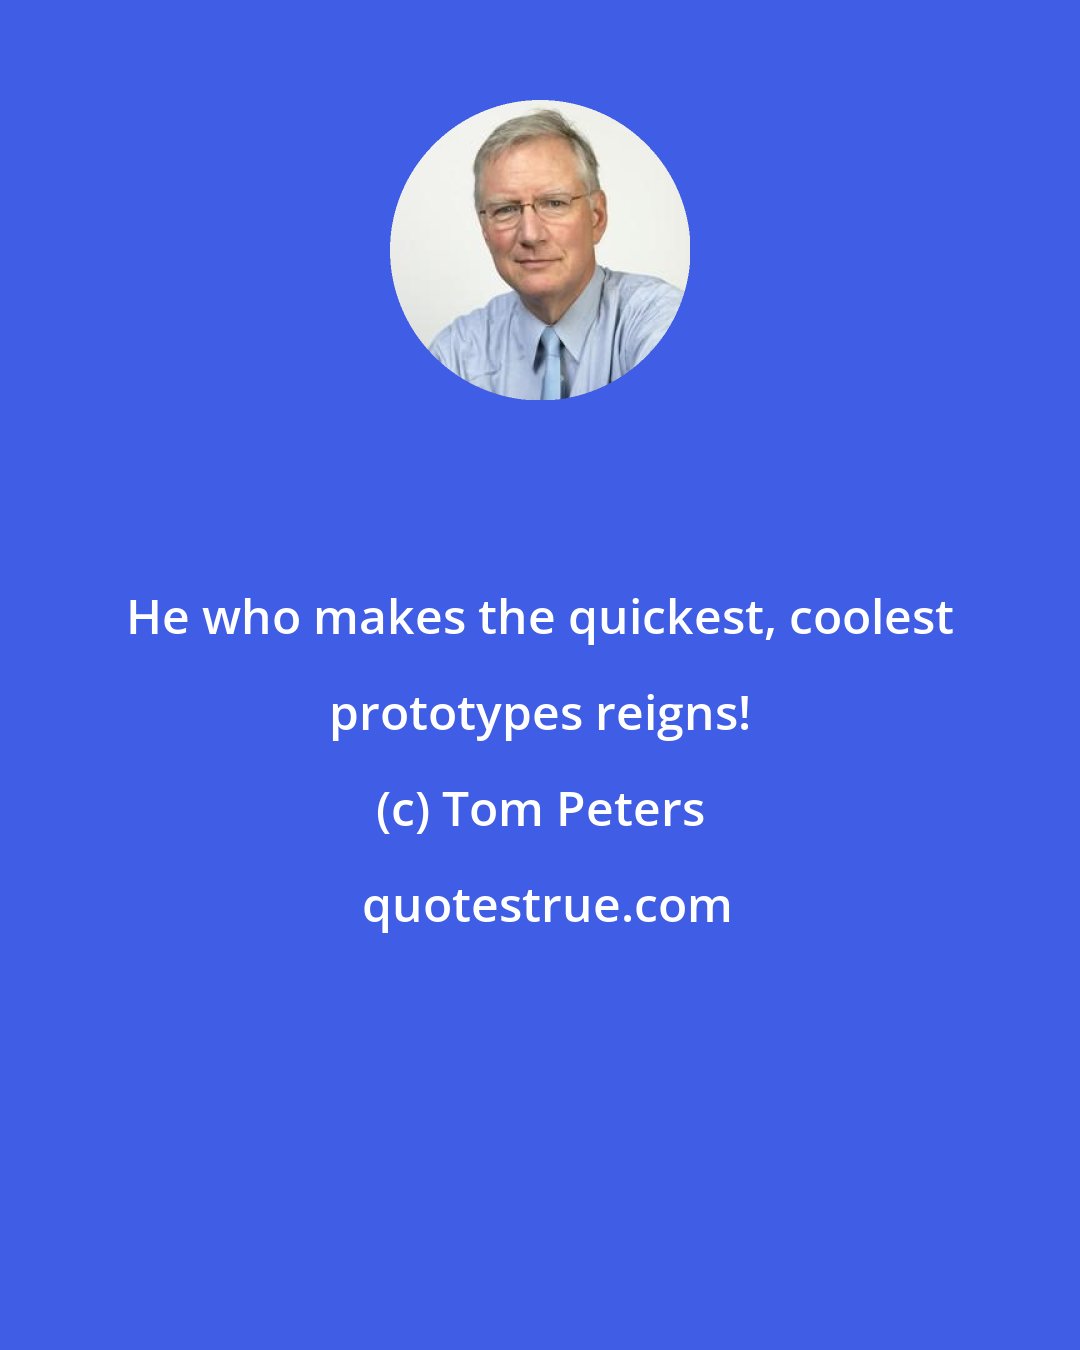 Tom Peters: He who makes the quickest, coolest prototypes reigns!